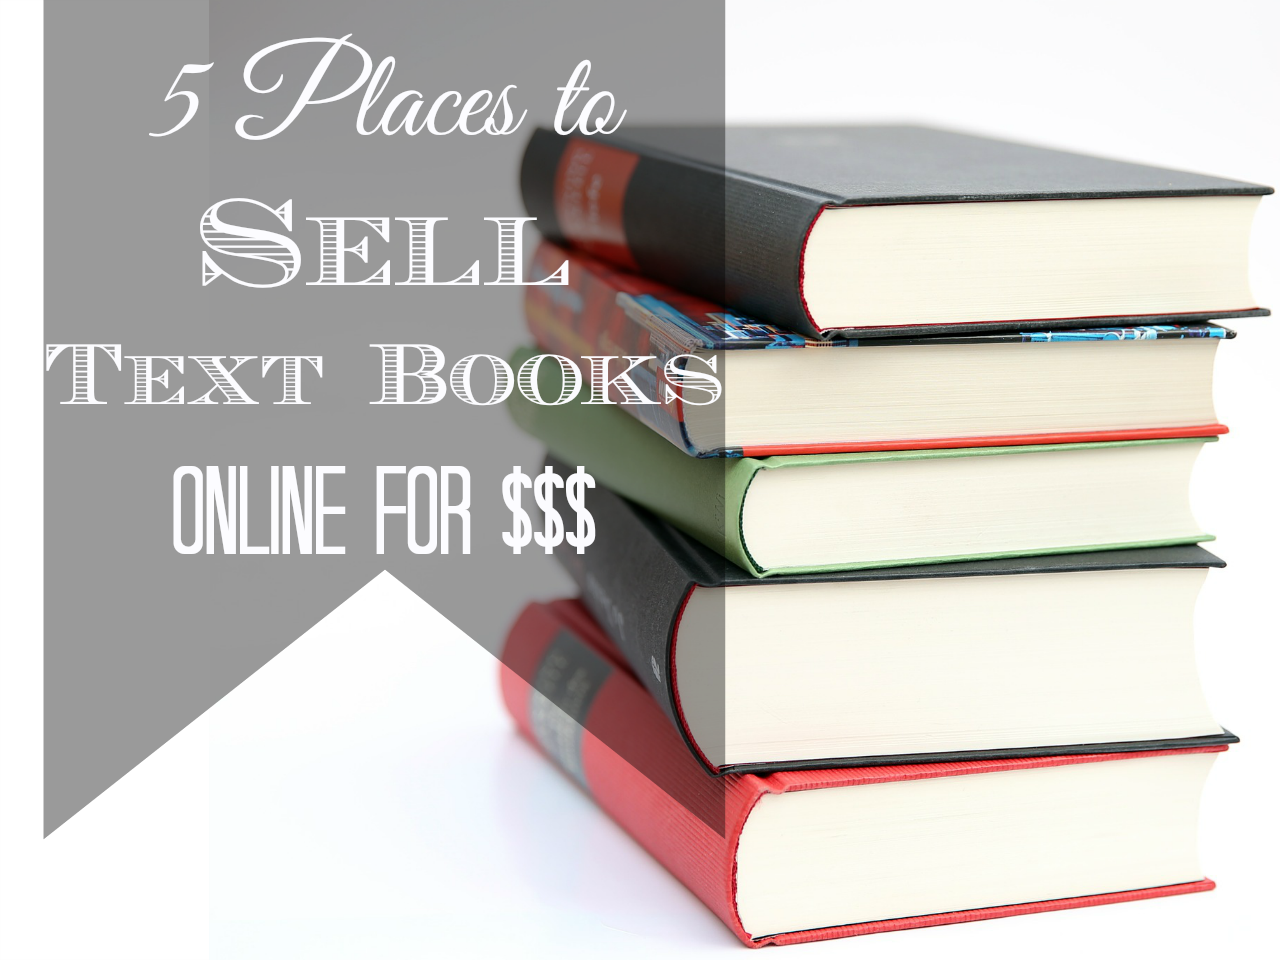 sell text books online